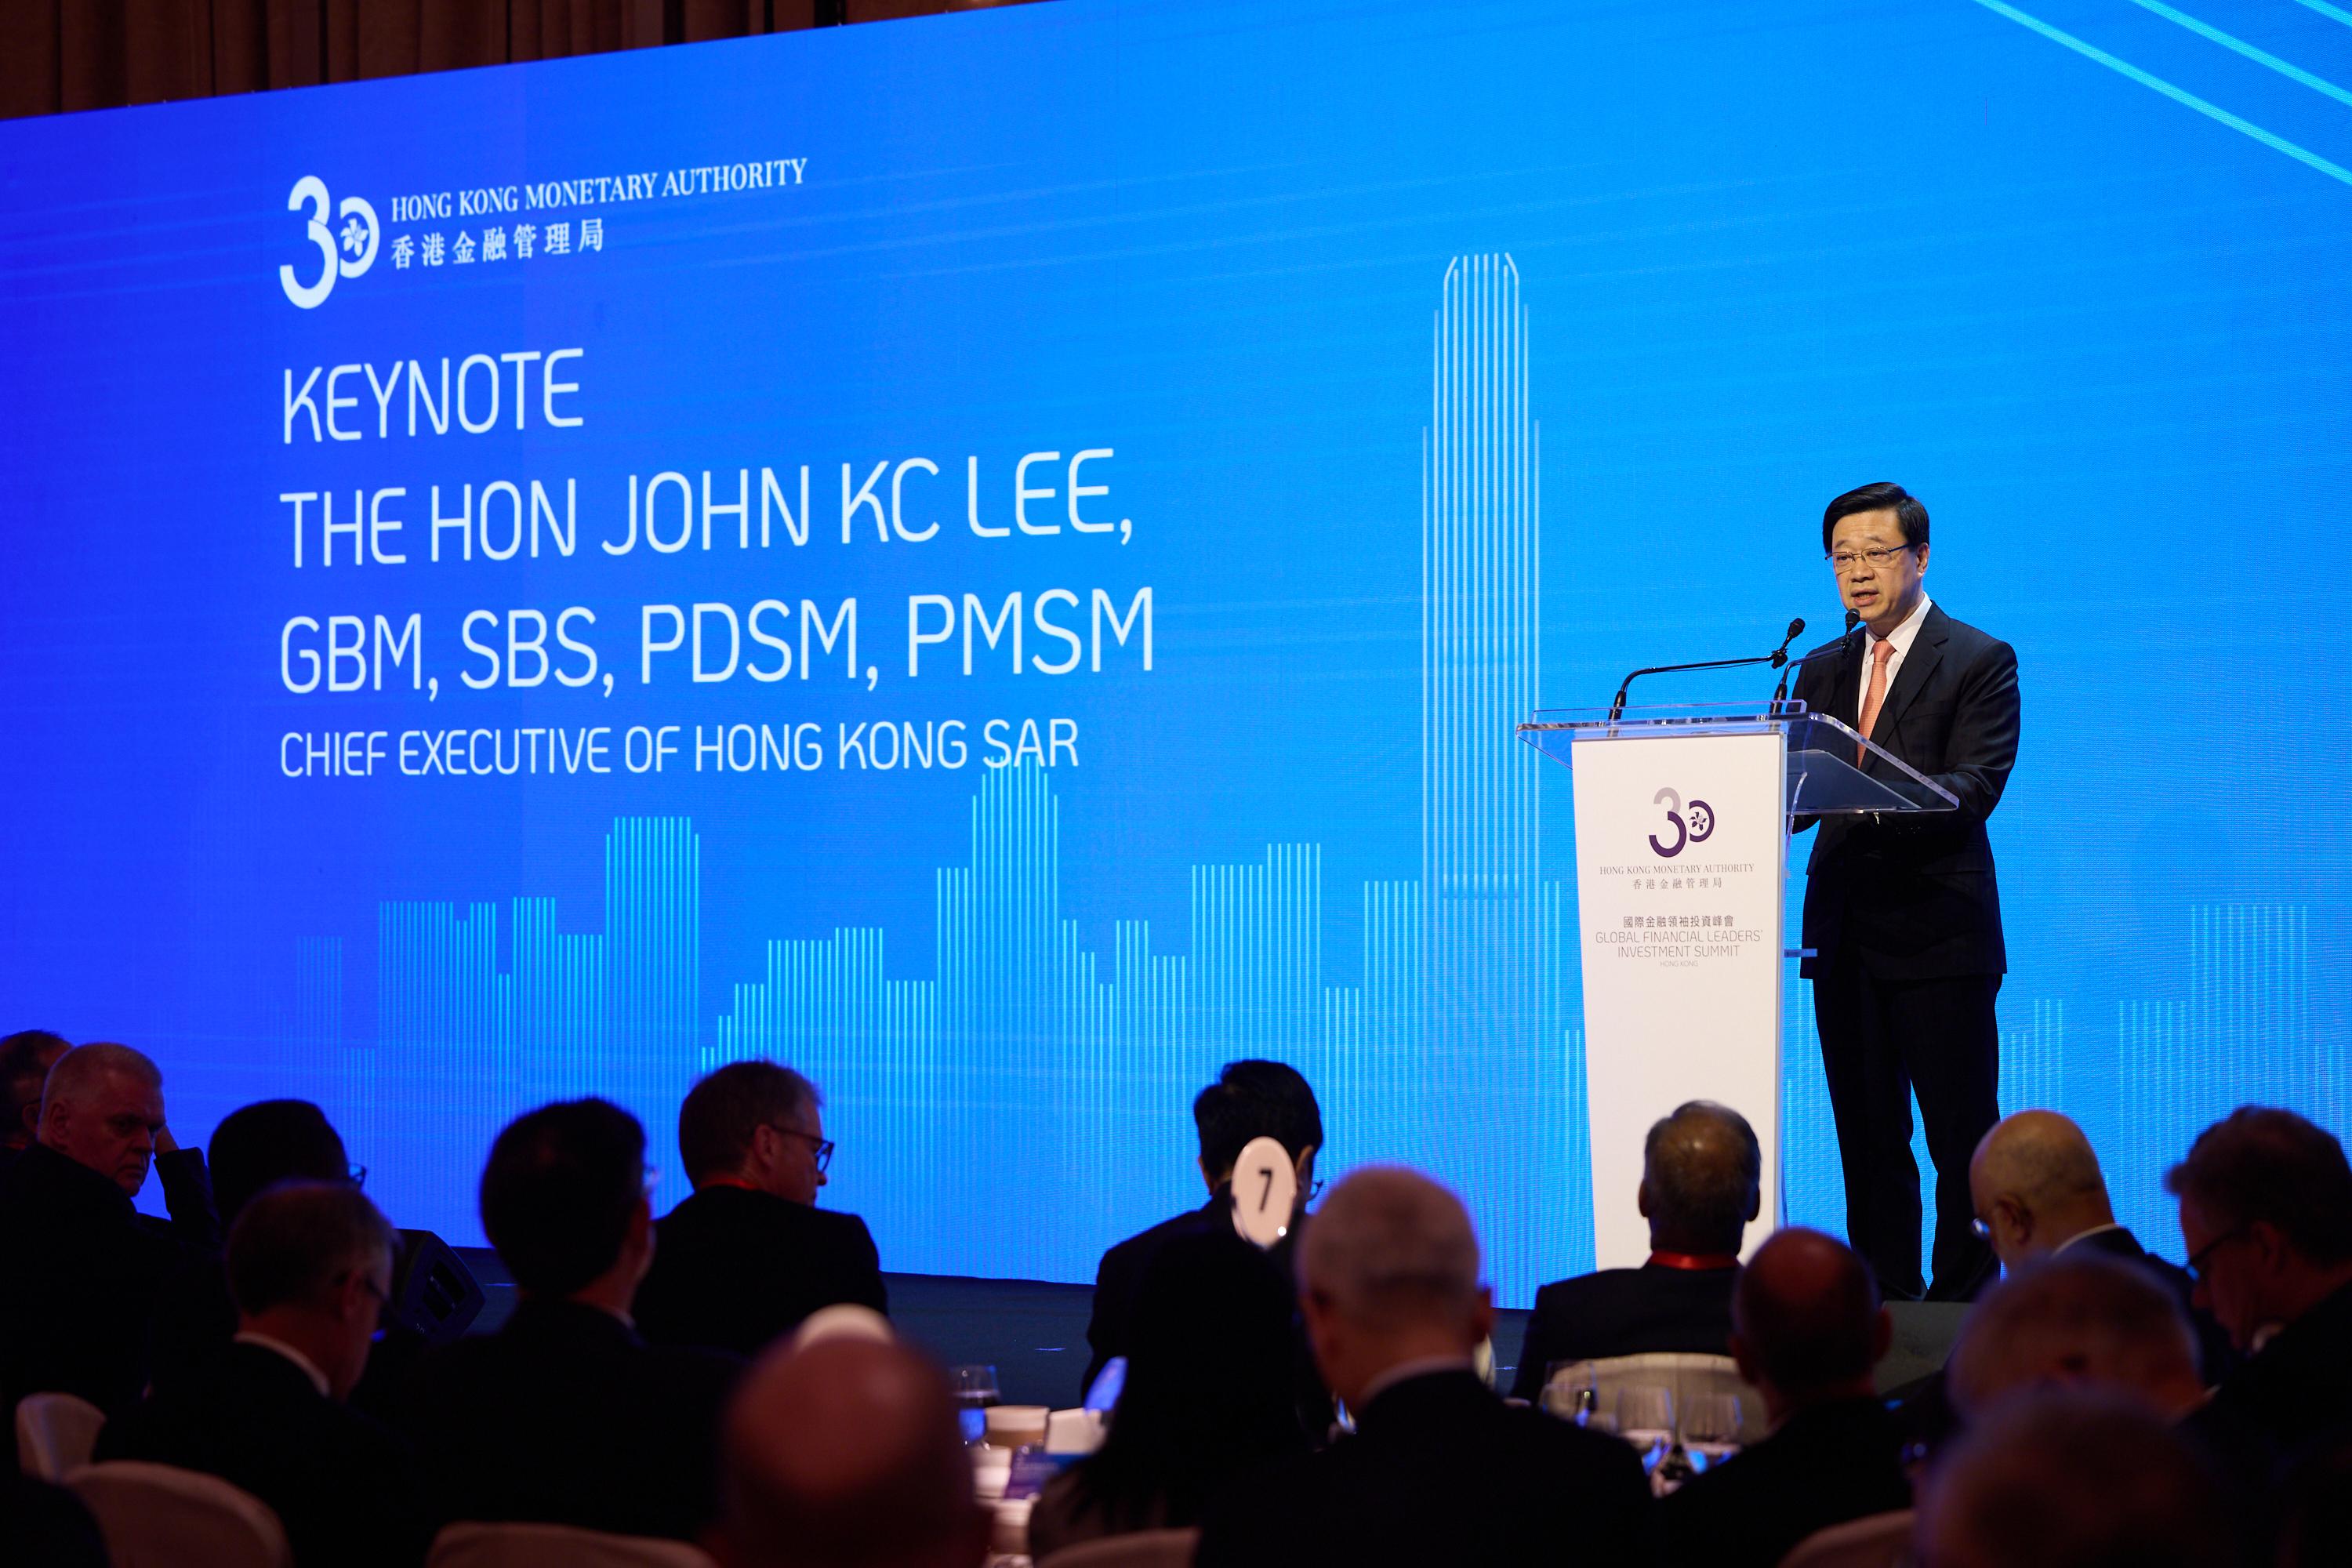 The Chief Executive of Hong Kong SAR, Mr John Lee, delivers the keynote speech at the Global Financial Leaders' Investment Summit today (November 7).